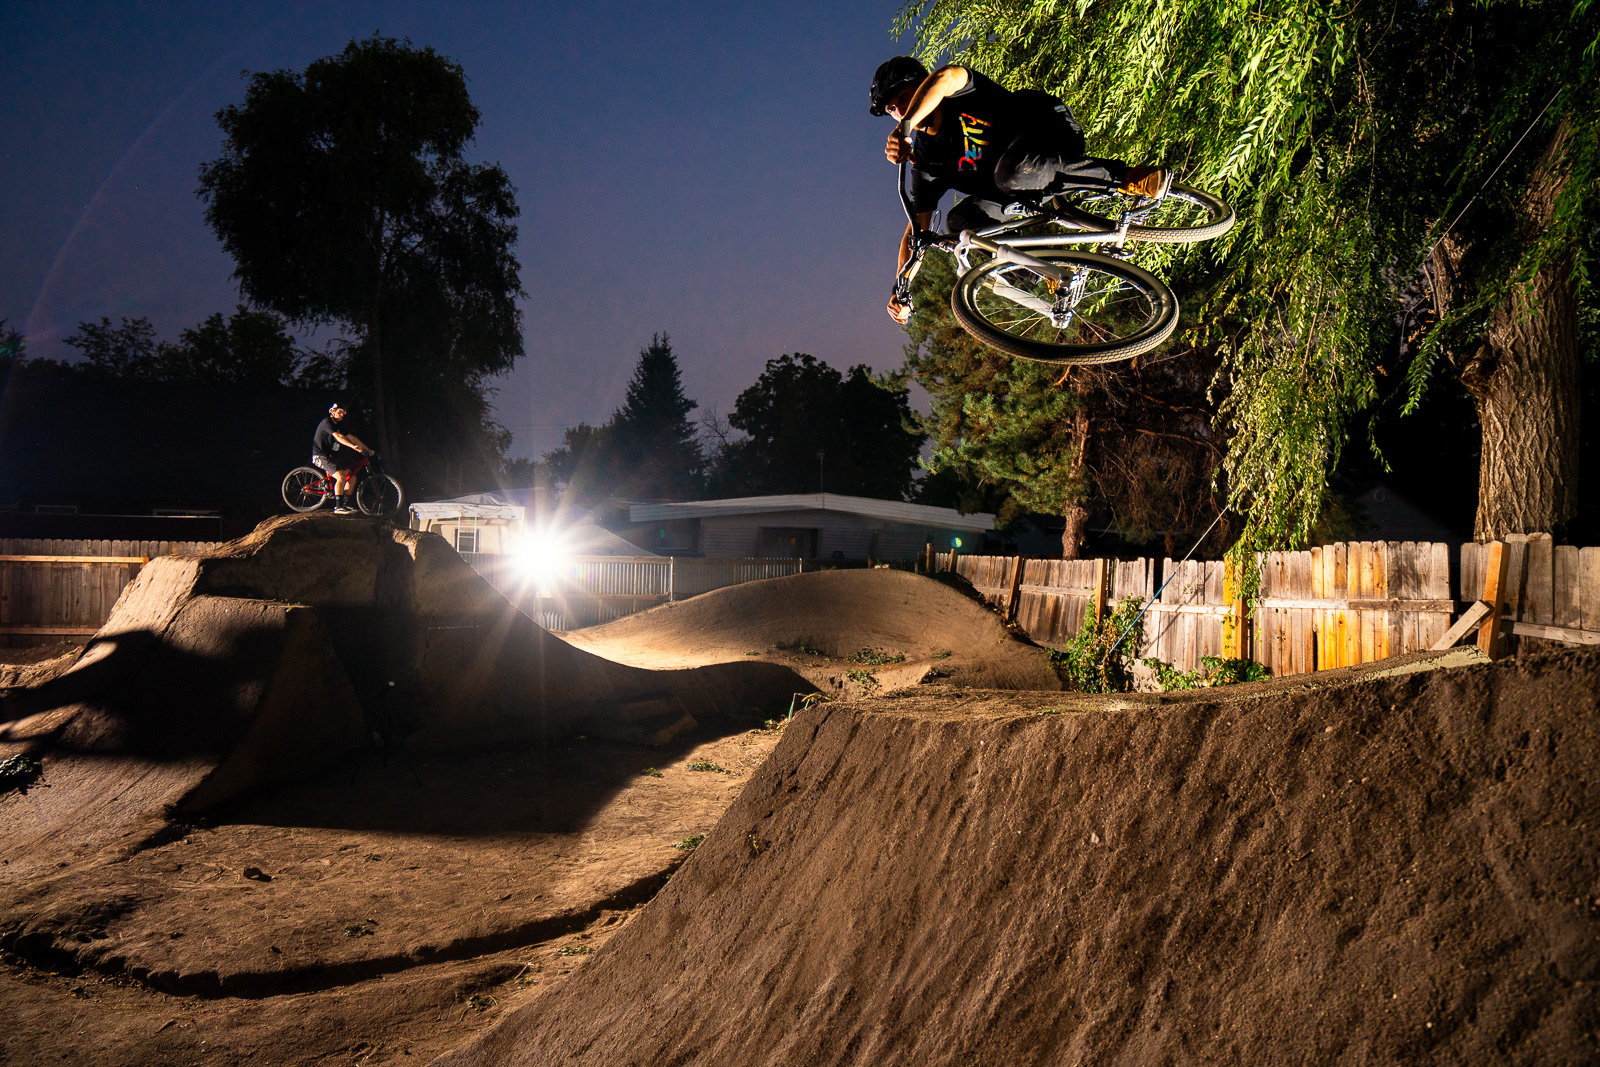 Austin Smith rides the dirt jumps in his back yard in Boise, Idaho